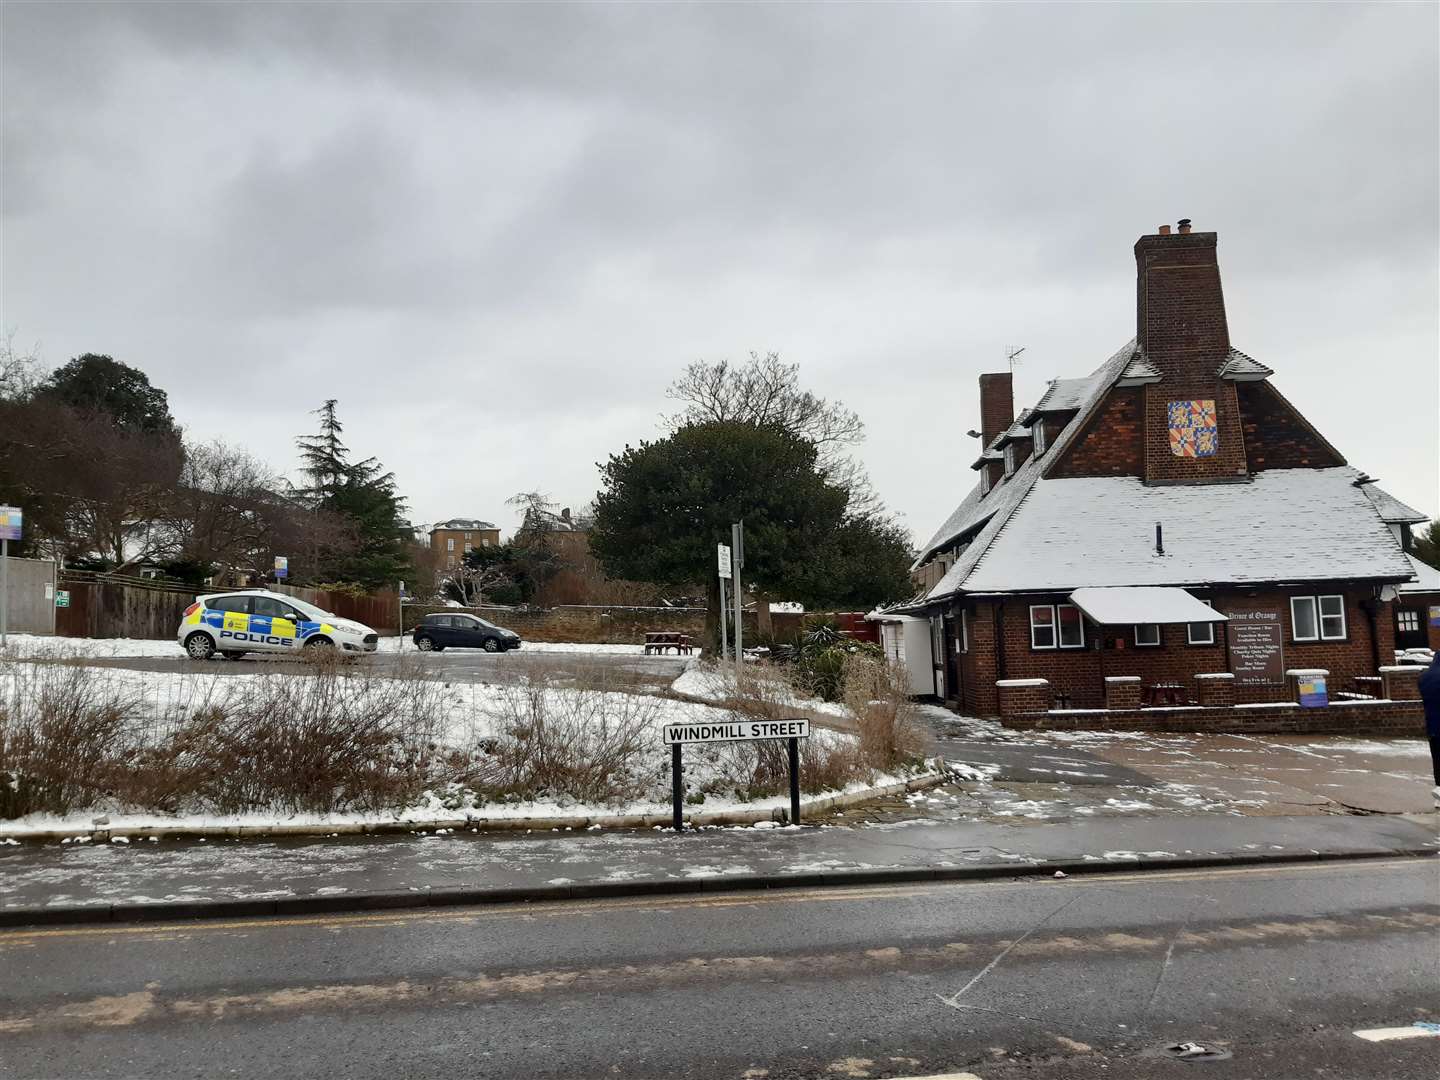 A police car was seen outside the Prince of Orange pub